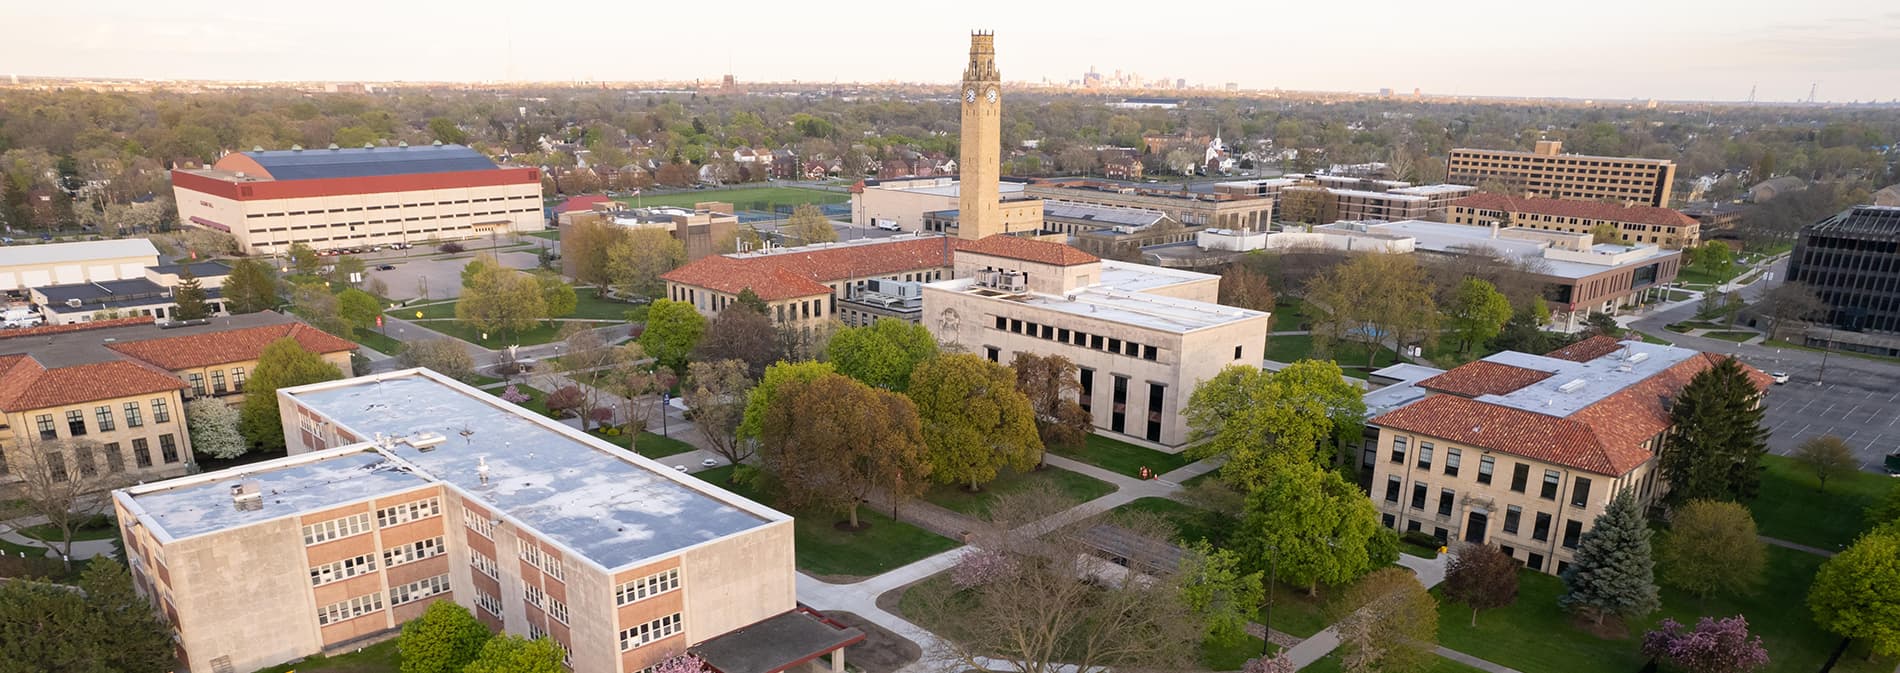 An aerial photograph of Detroit Mercy's McNichols Campus.